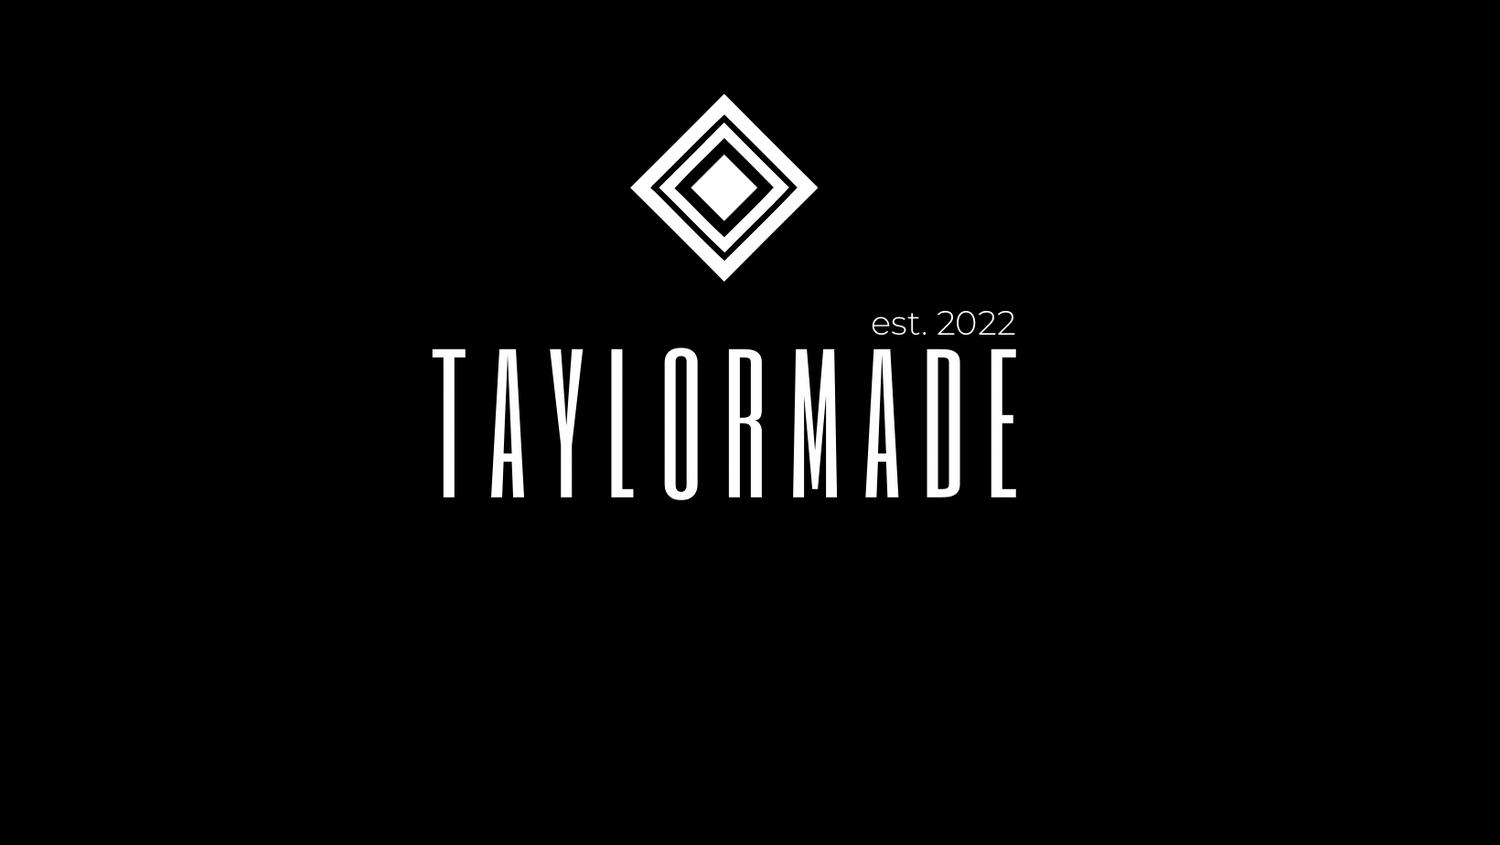 Taylormade candle co